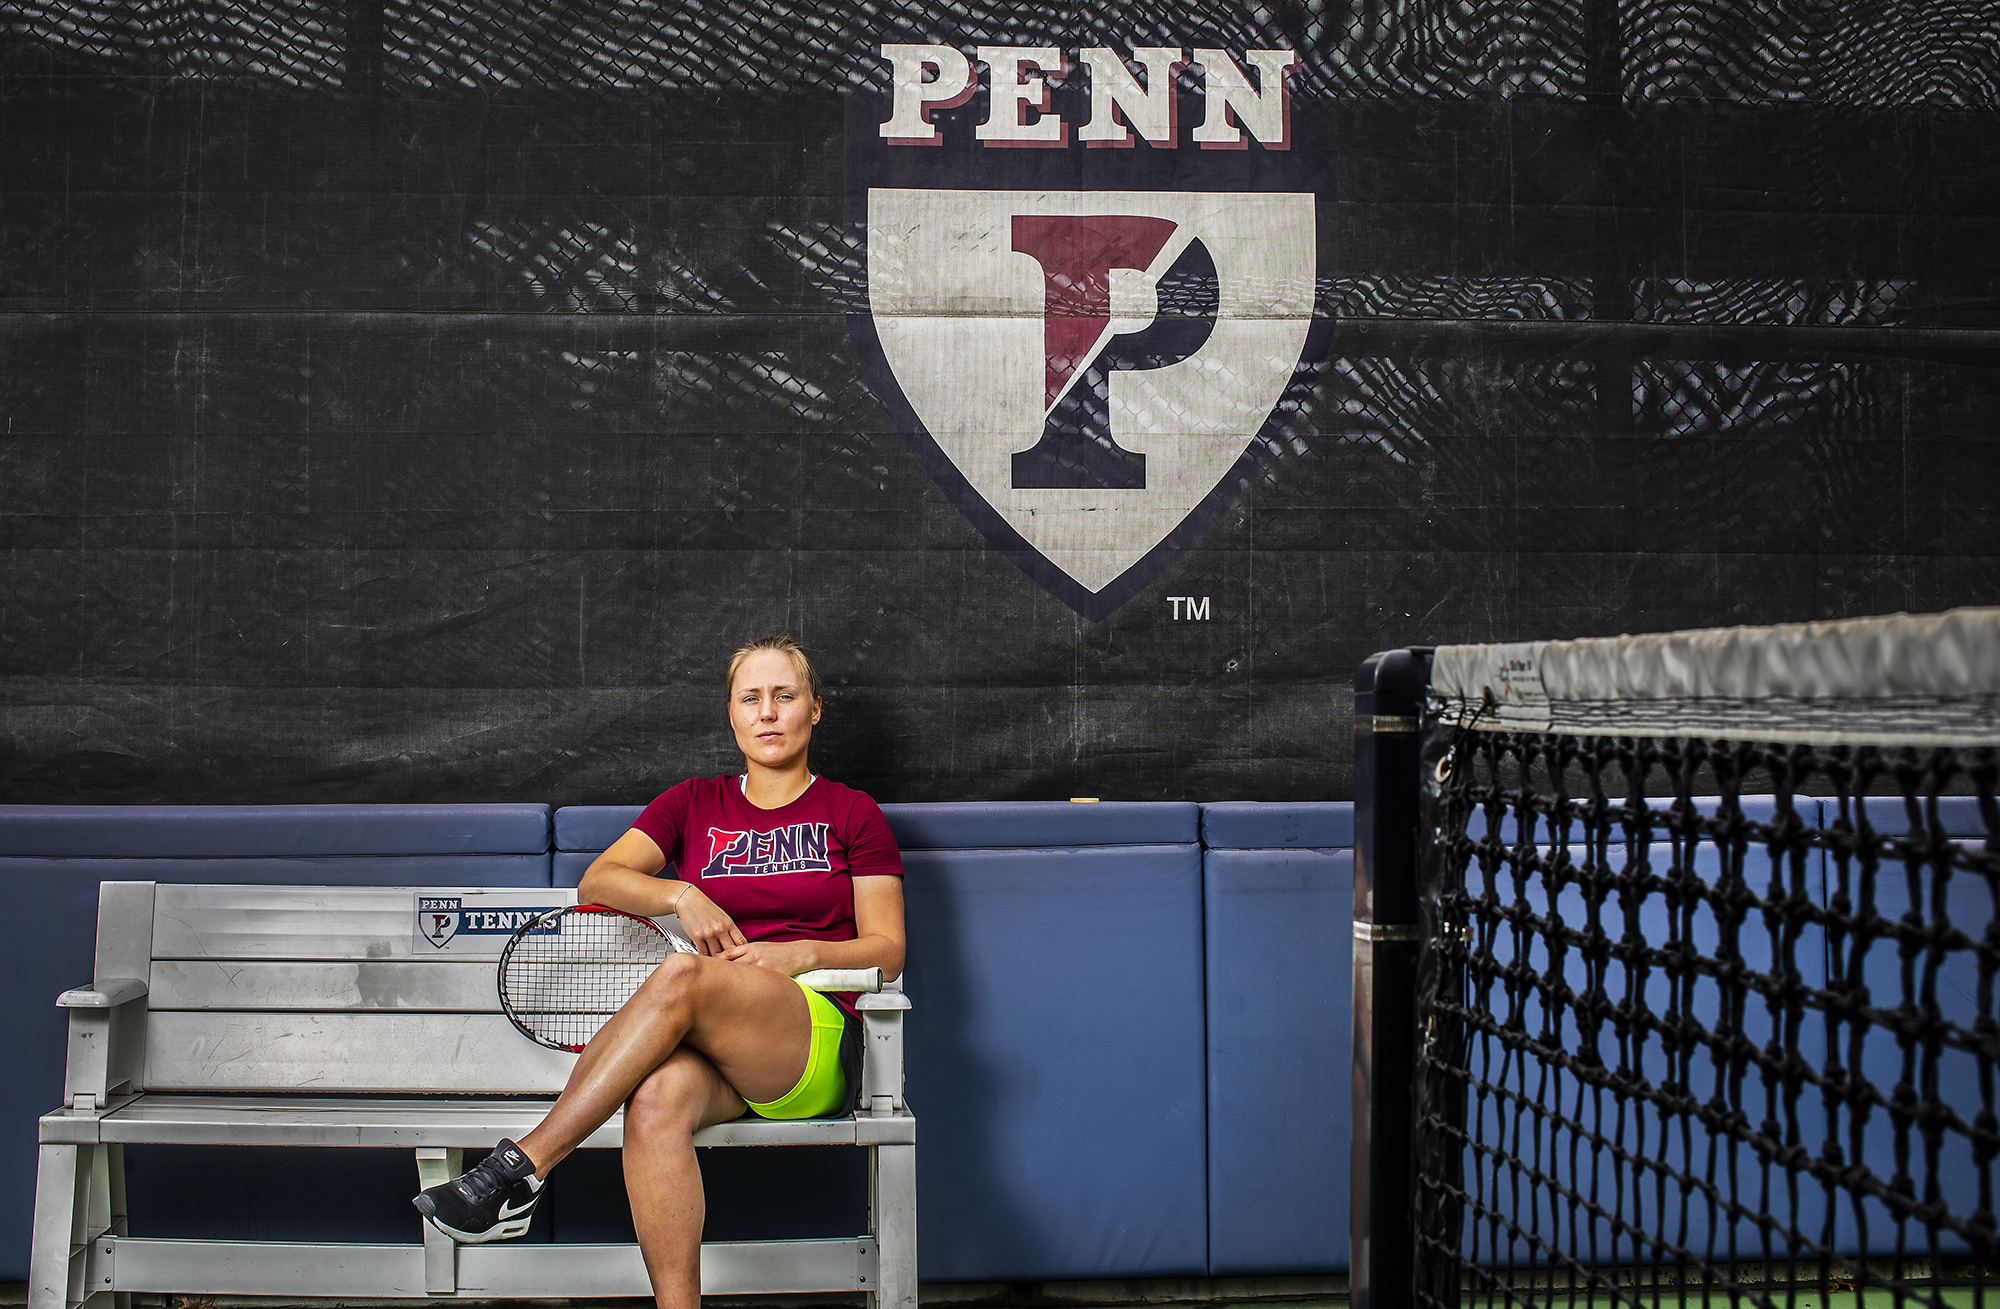 Bryzgalova sits on a bench at the Penn tennis courts, holding her racquet.